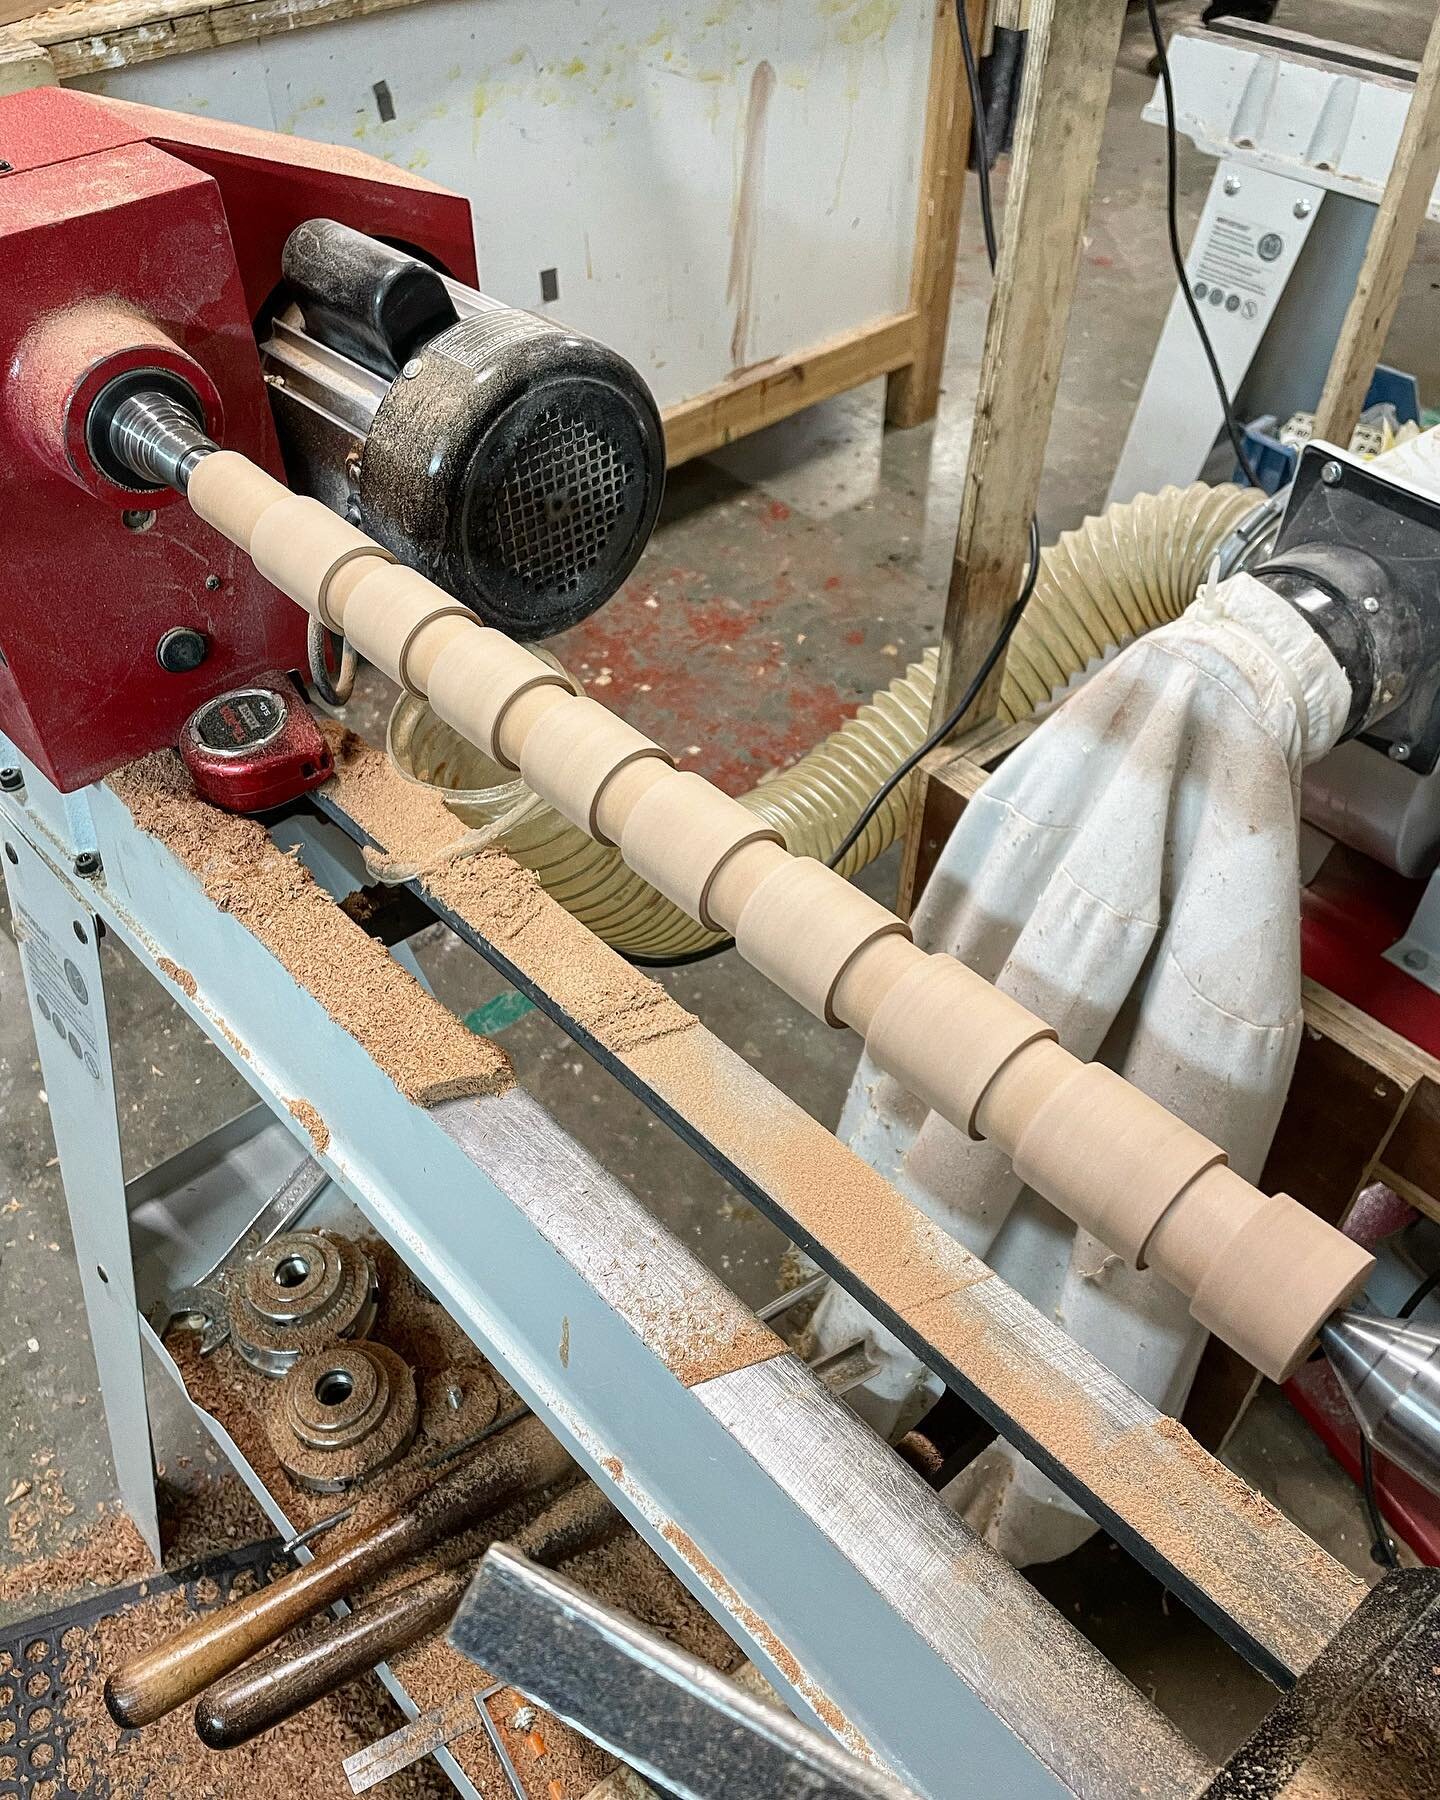 Day on the lathe making stool legs at @blackhorsews this weekend. 

I&rsquo;m making a stool from locally sourced @fallenandfelled London Plane from a tree that had to be cut down in Denmark Hill. I&rsquo;ll be using fox wedge mortise and tenon joint